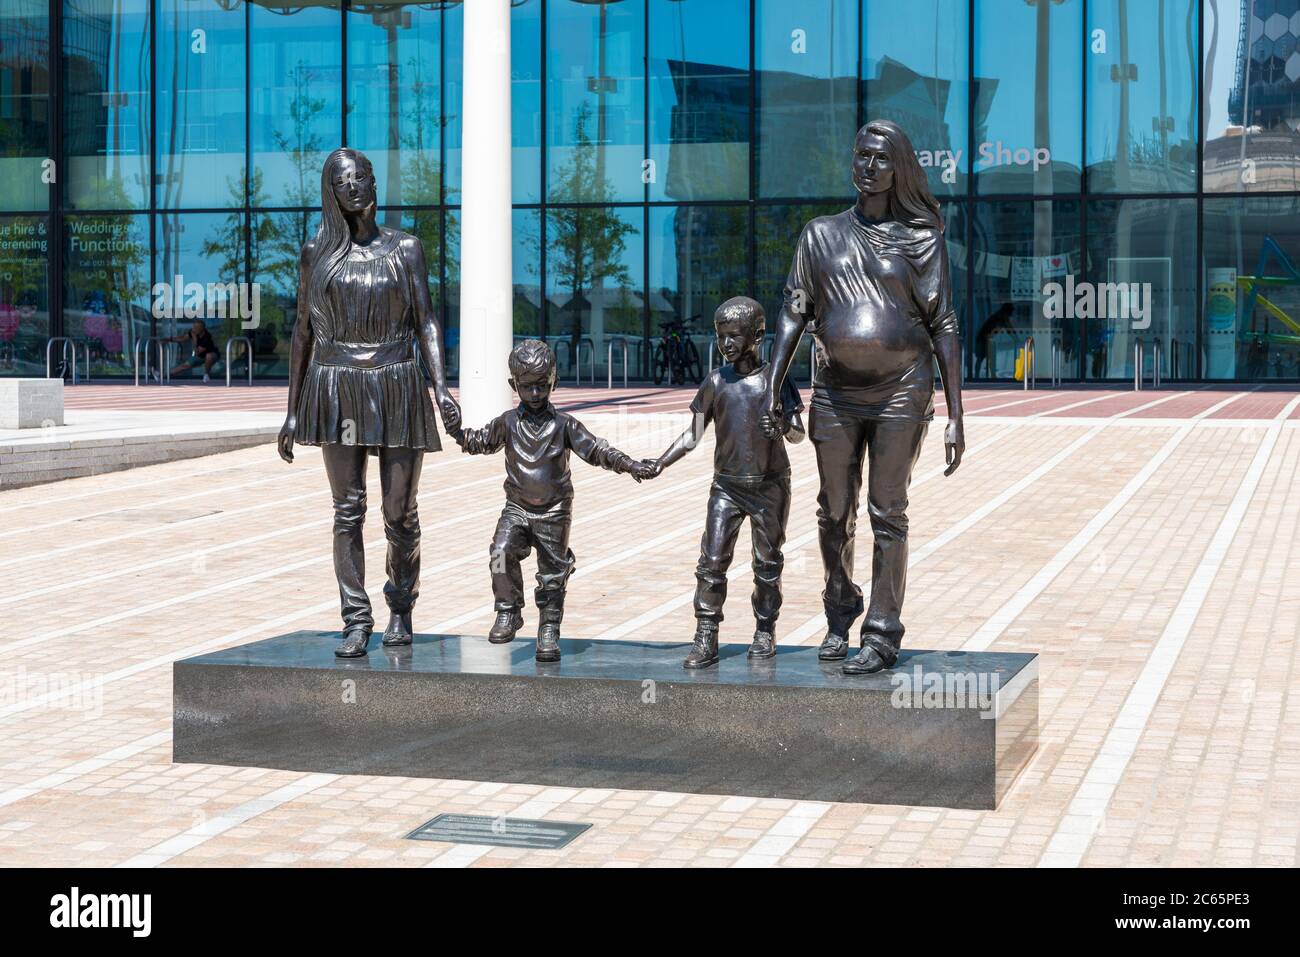 A Real Family of Birmingham sculpture cast in bronze by Gillian Wearing in Centenary Square, Birmingham, UK Stock Photo